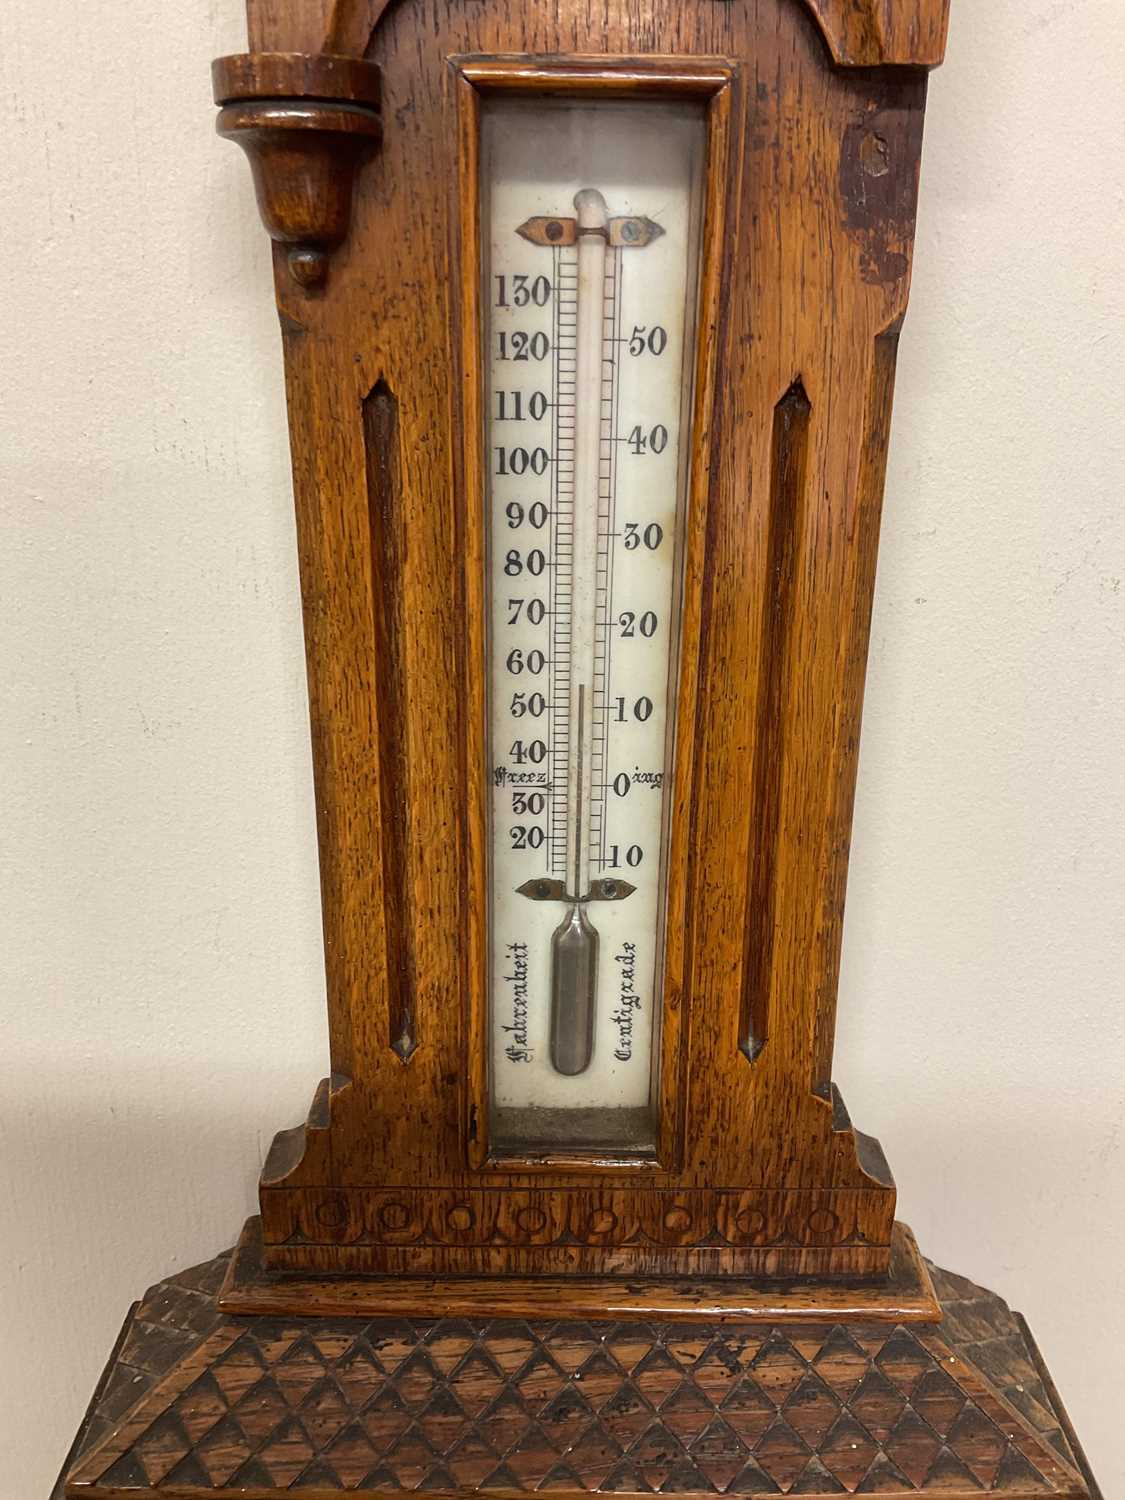 A Gray and Shelby Barometer; height 80 cm. - Image 3 of 3